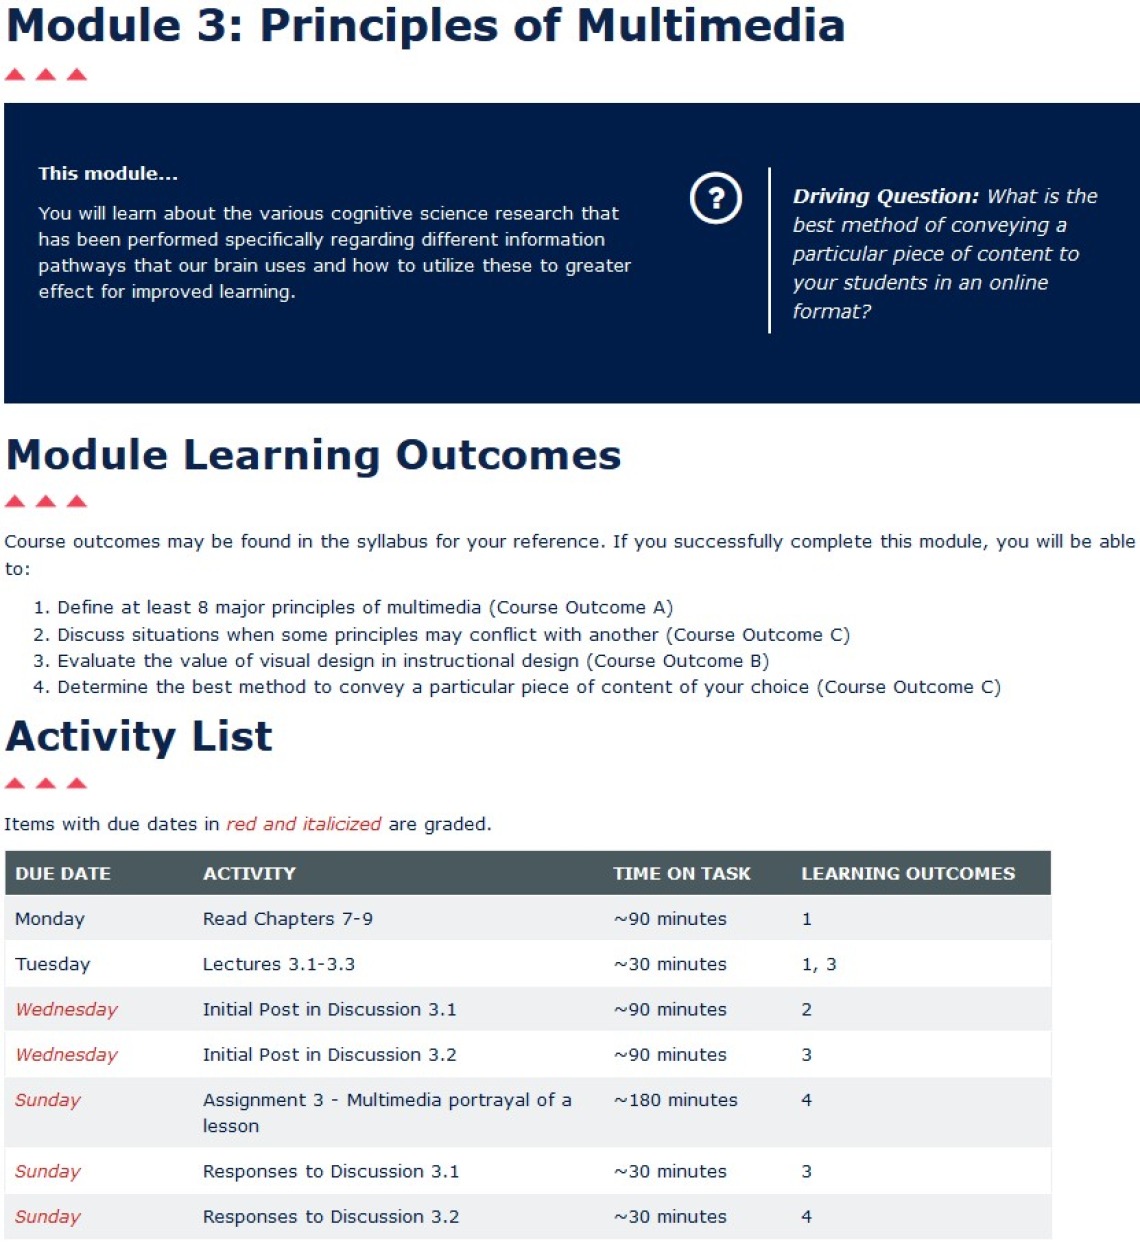 overview of content showing a summary of how content ties into the narrative of the course, a list of module outcomes and how they align to the course outcomes, and an activity list organized in chronological order with alignment, time on task